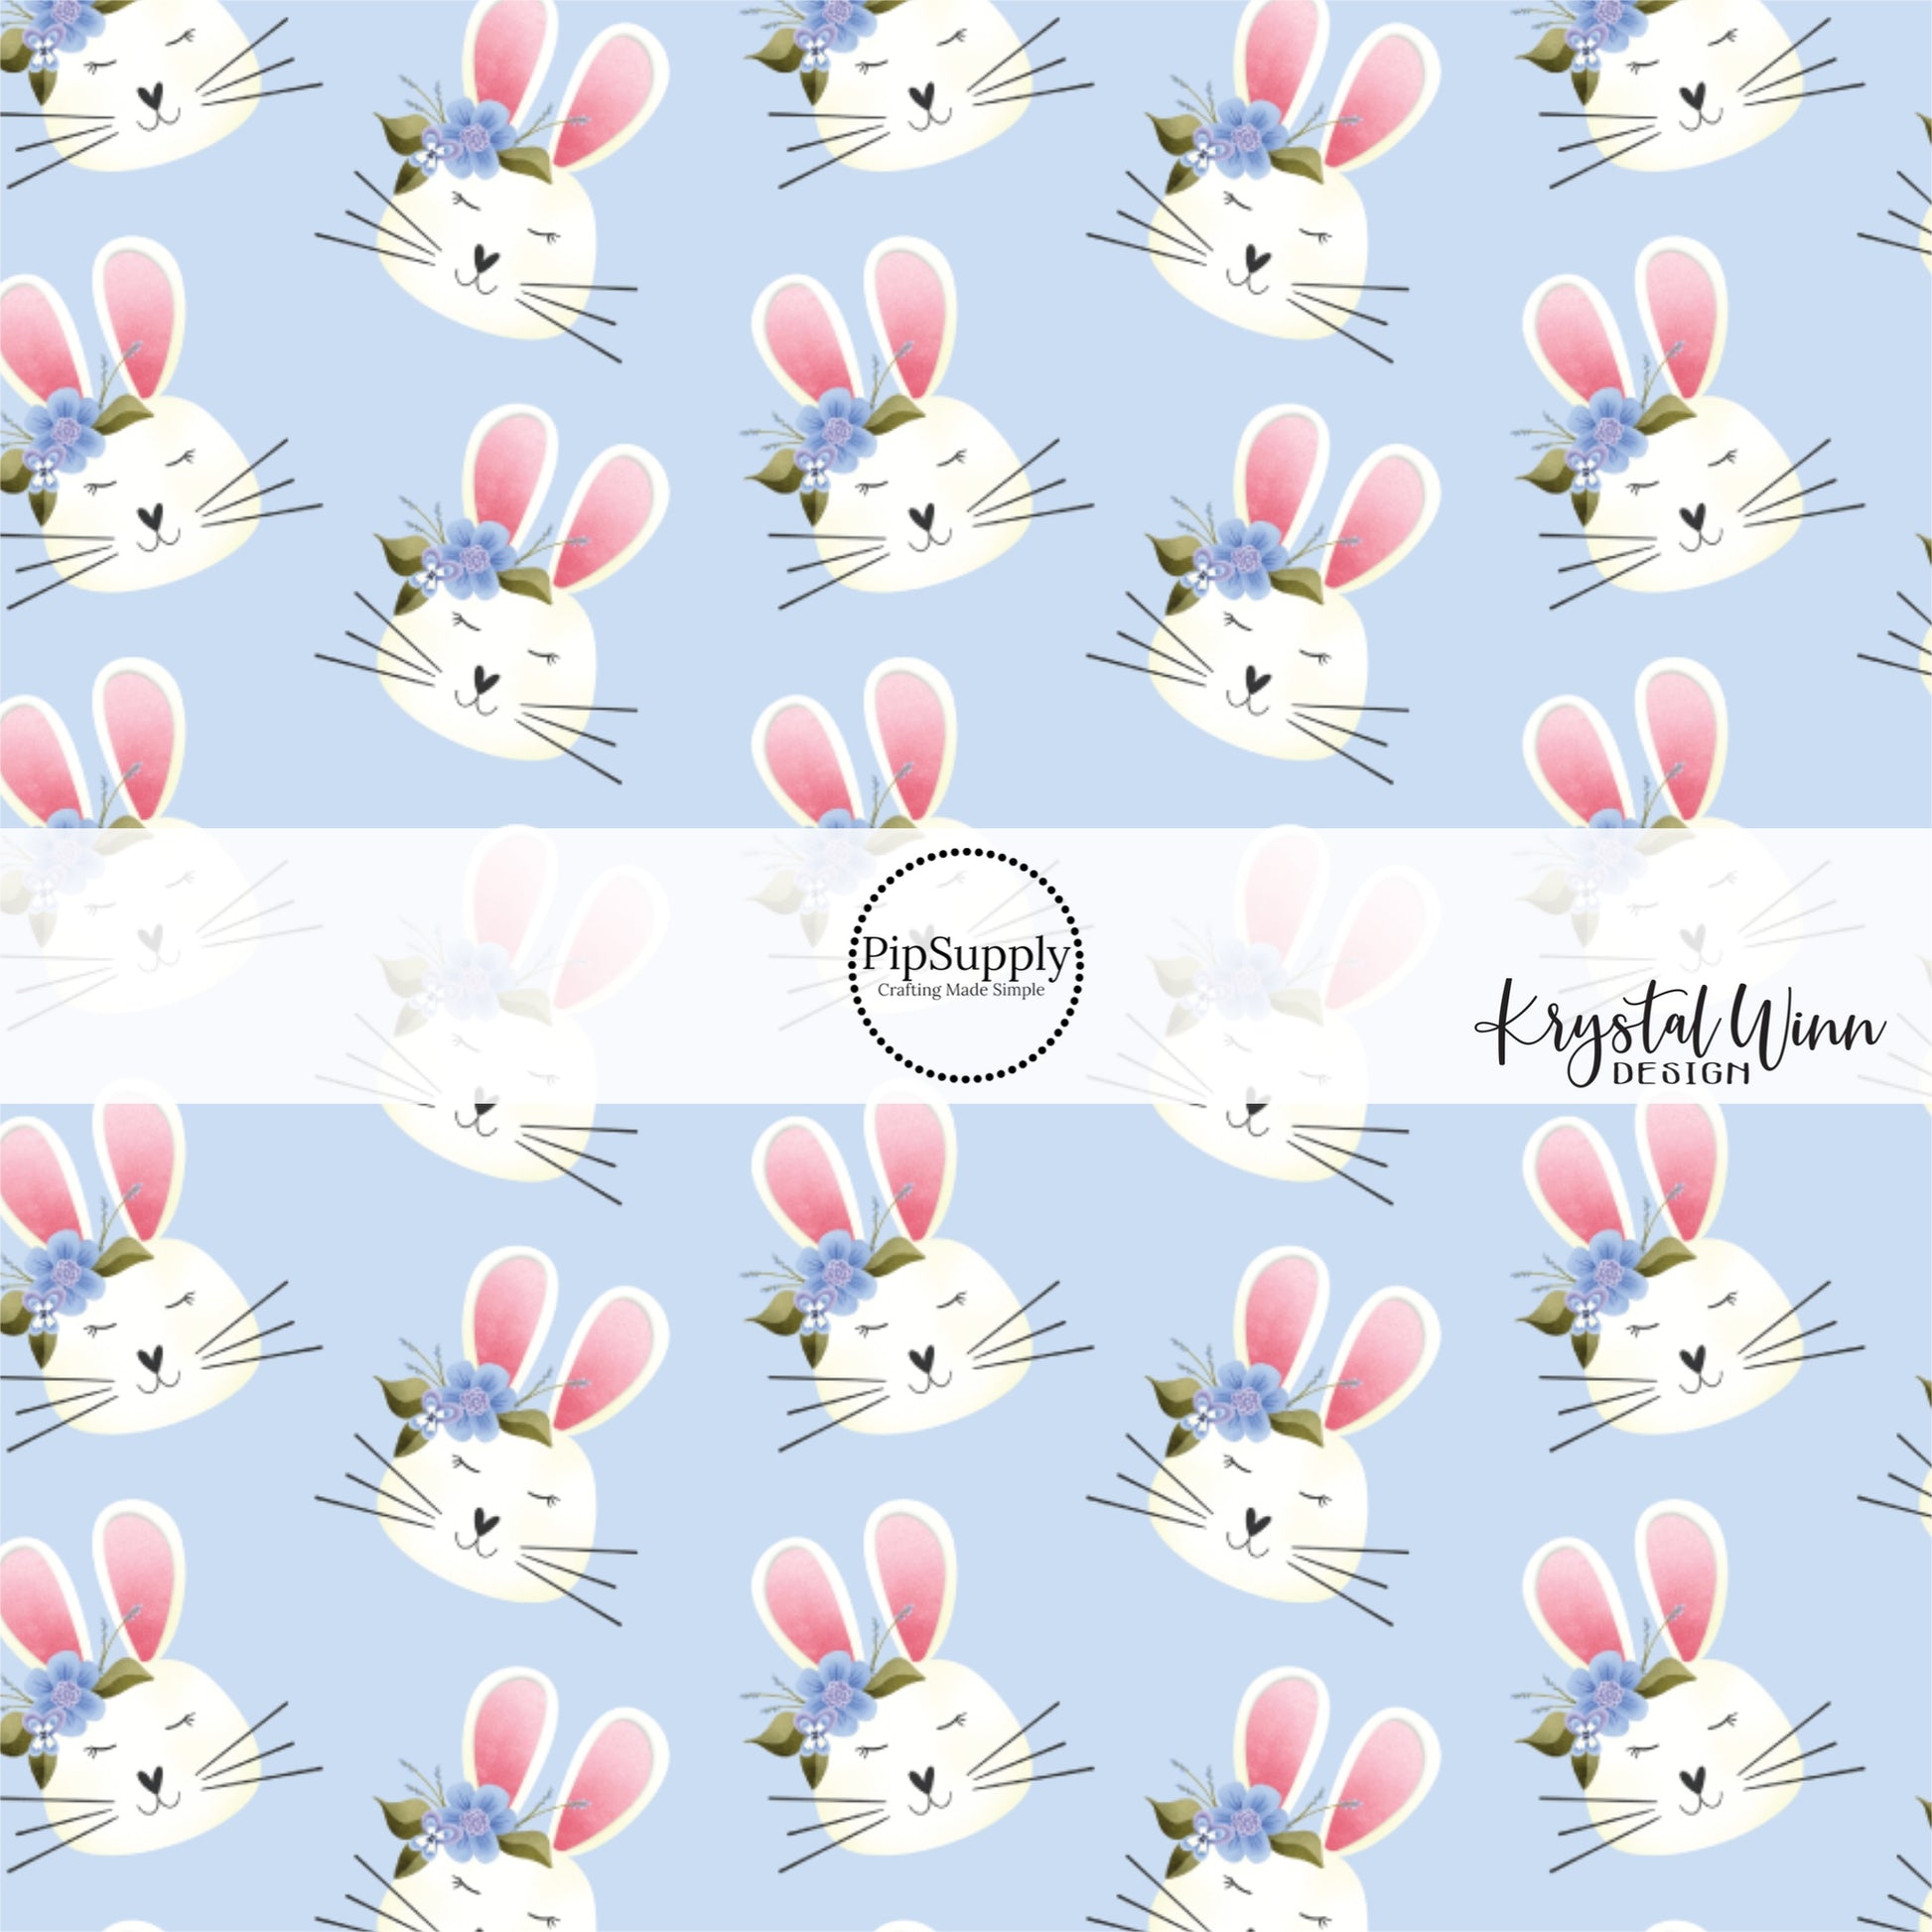 blue fabric by the yard with scattered white bunny rabbits and flowers - Easter Bunny Fabric 